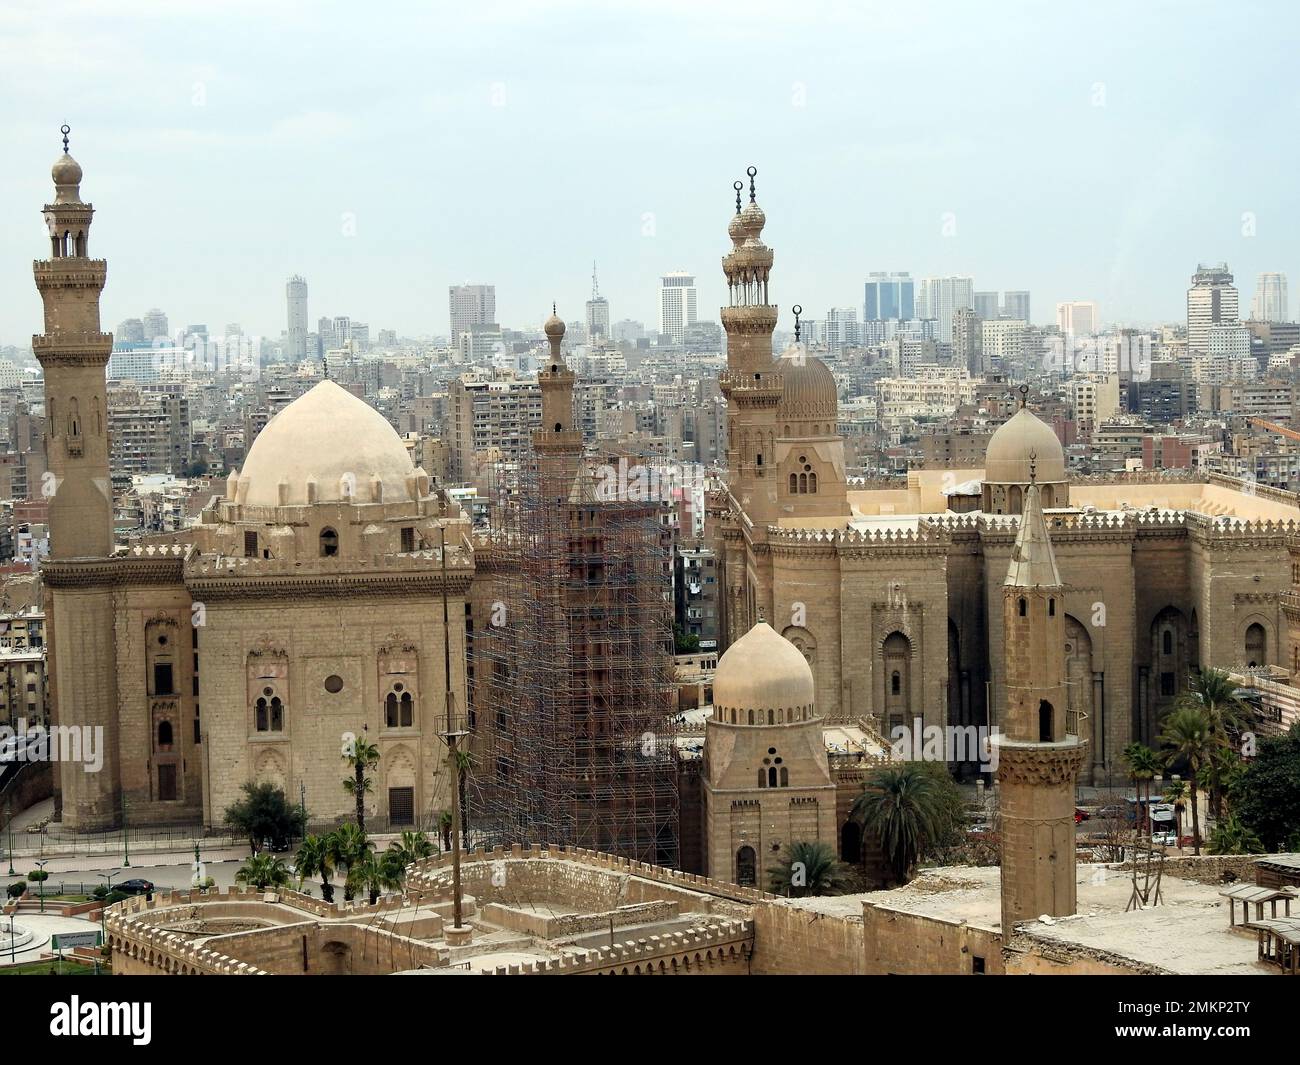 Cairo, Egypt, January 7 2023: Sultan Hassan and Al Rifa'i Mosques in old Cairo city Citadel square, very famous Islamic mosques in Egypt and very clos Stock Photo